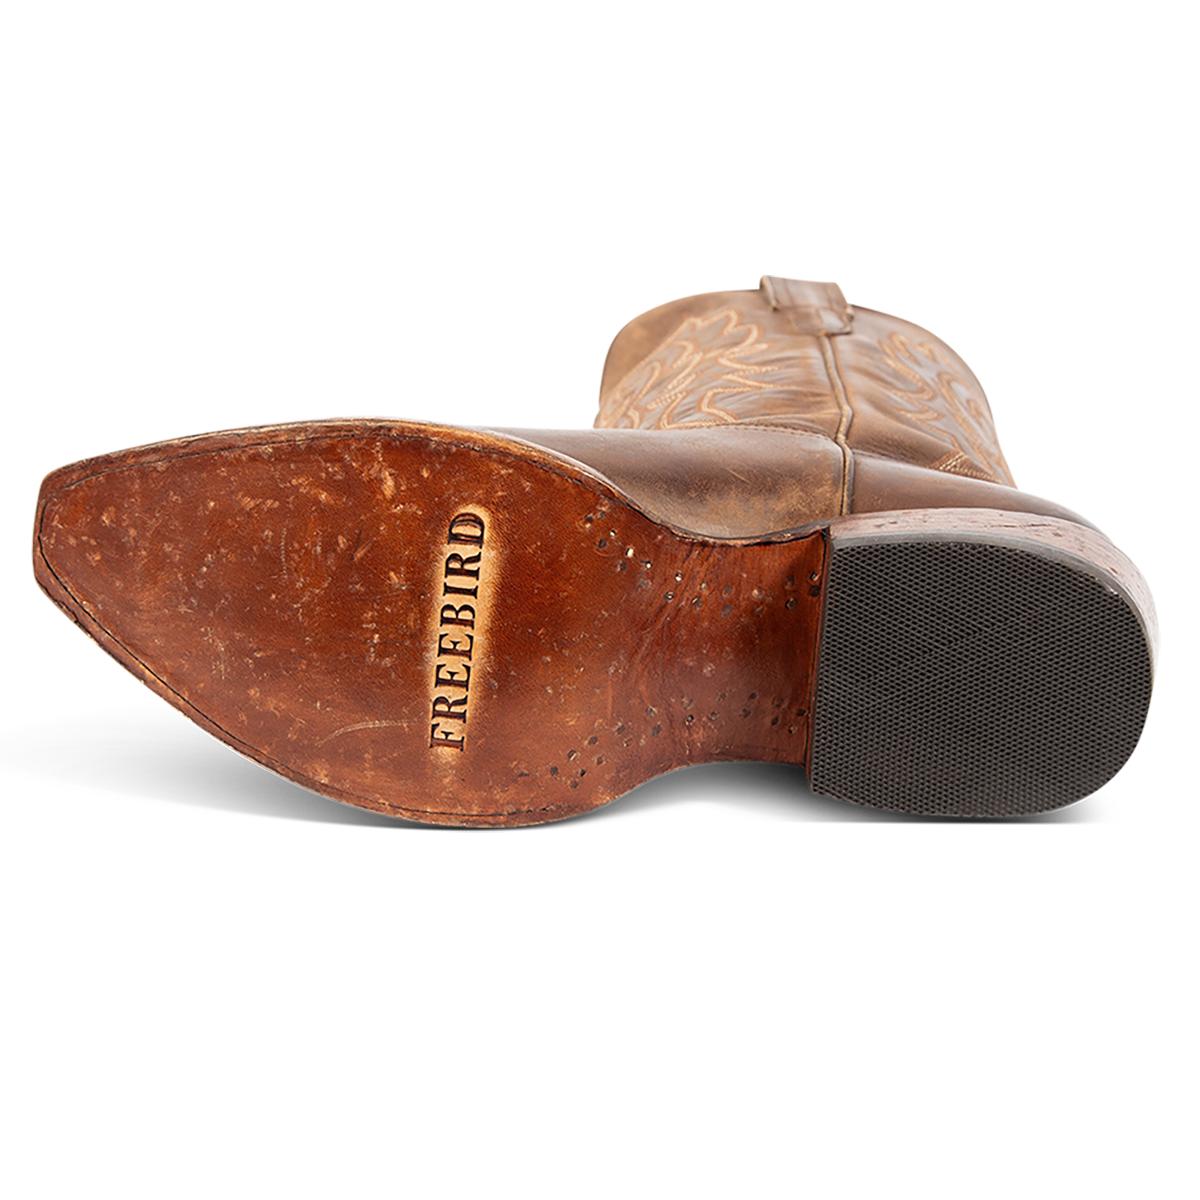 Leather sole imprinted with FREEBIRD on men's Marshall Brown  western cowboy boot